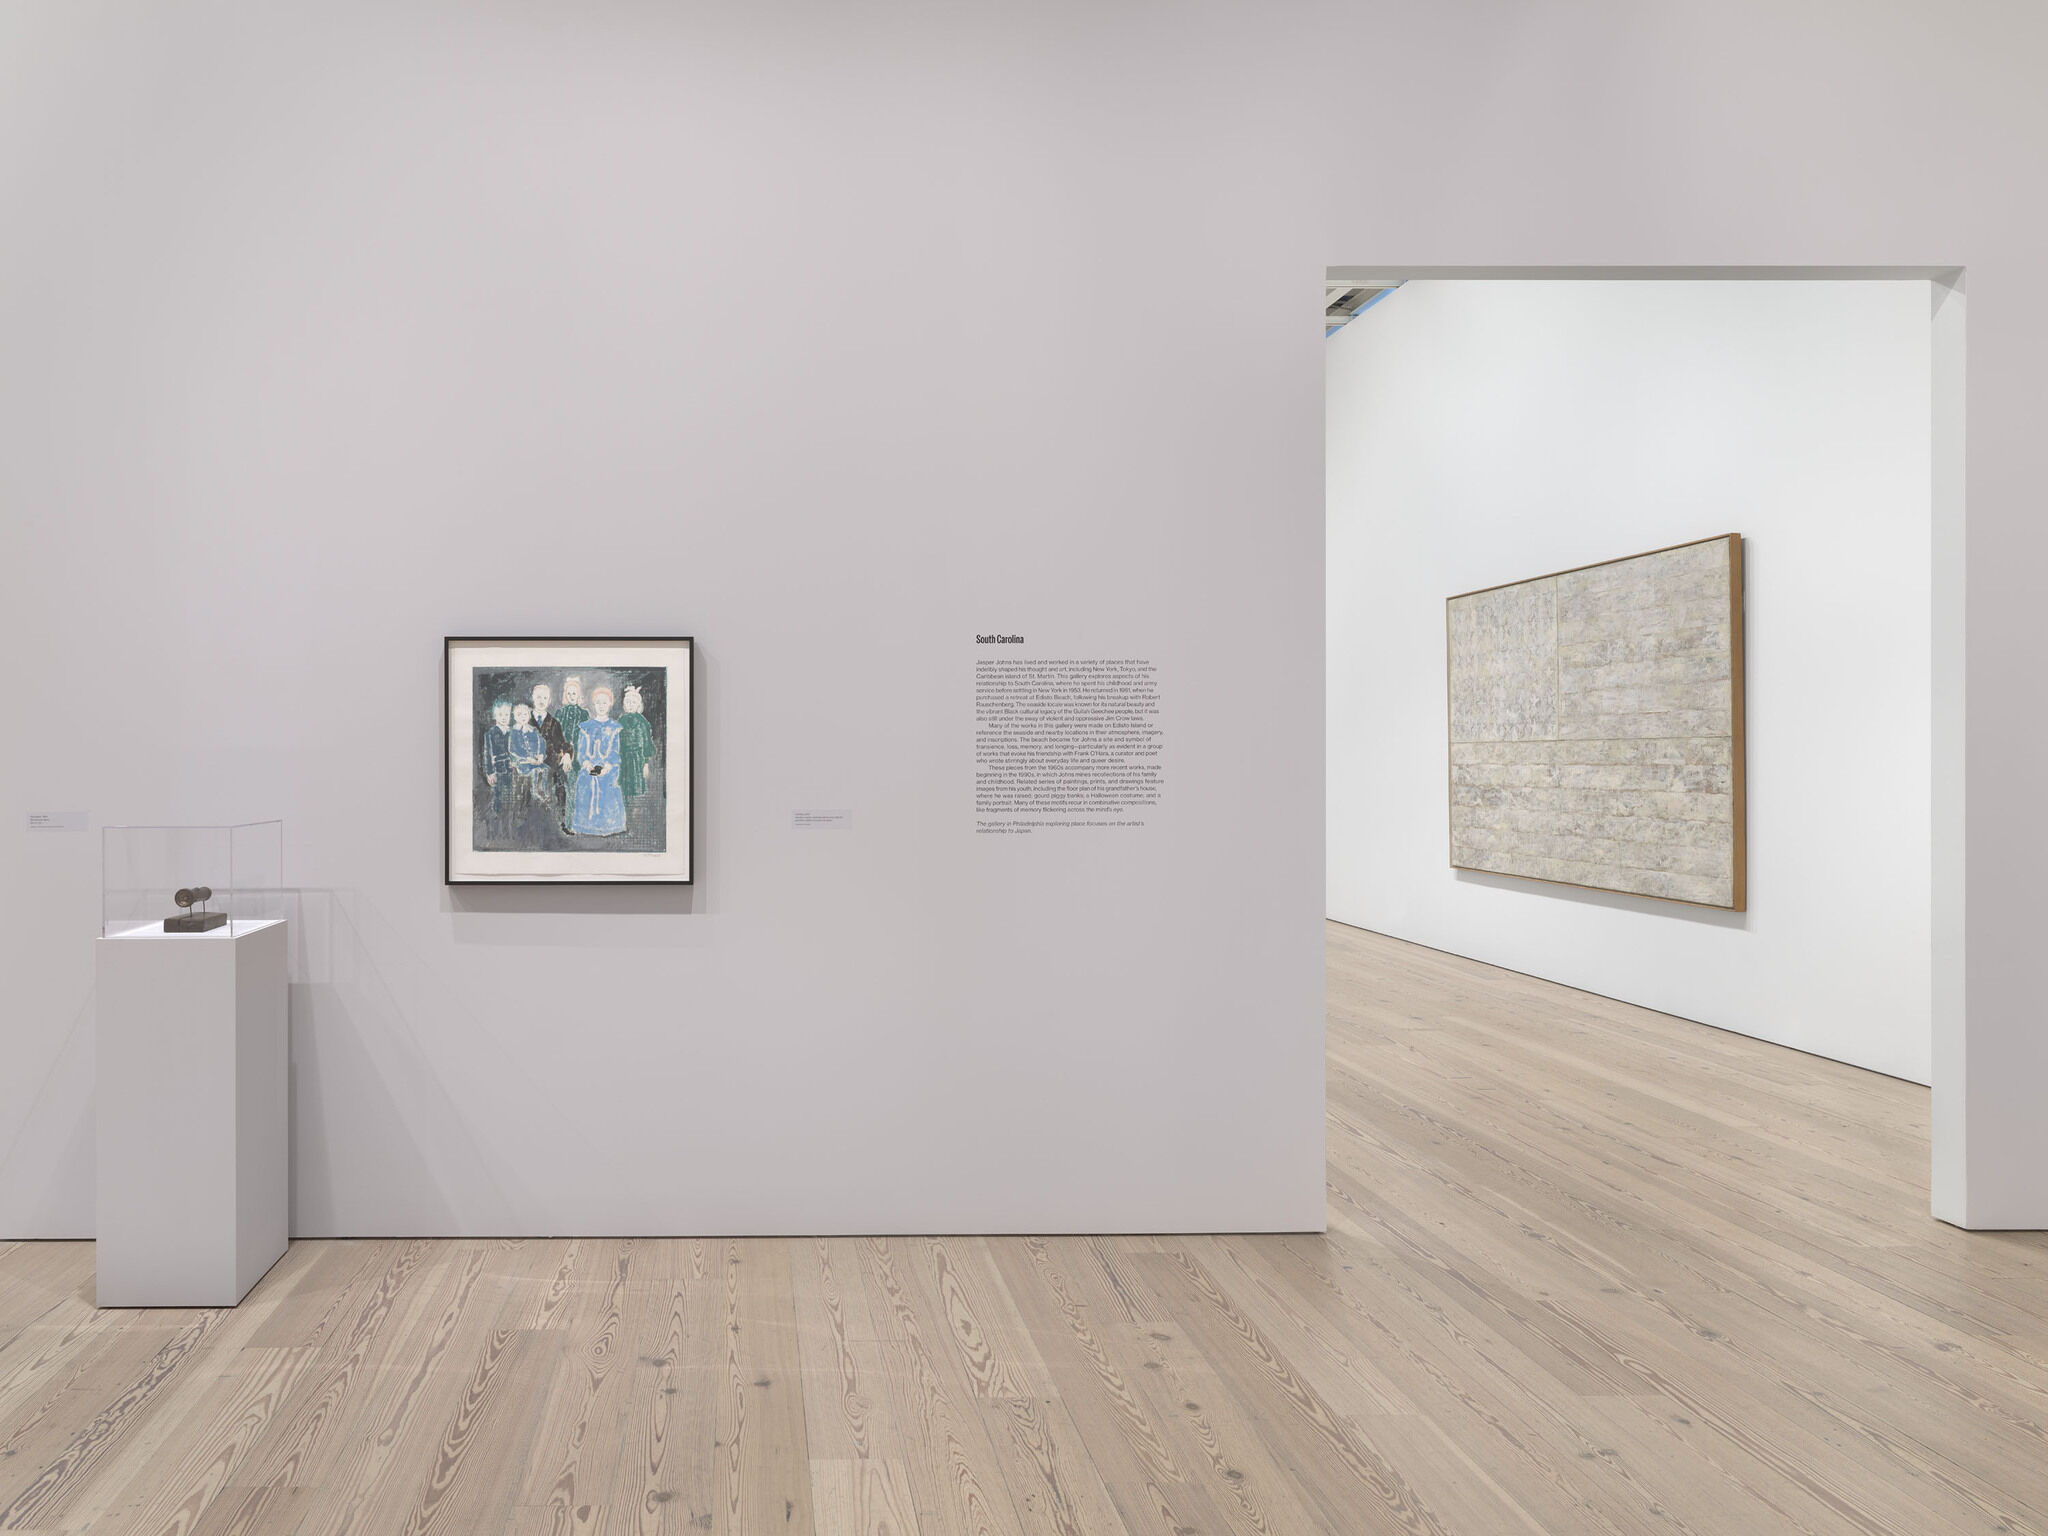 A white exhibition room with two framed works and a third work encased in glass. 